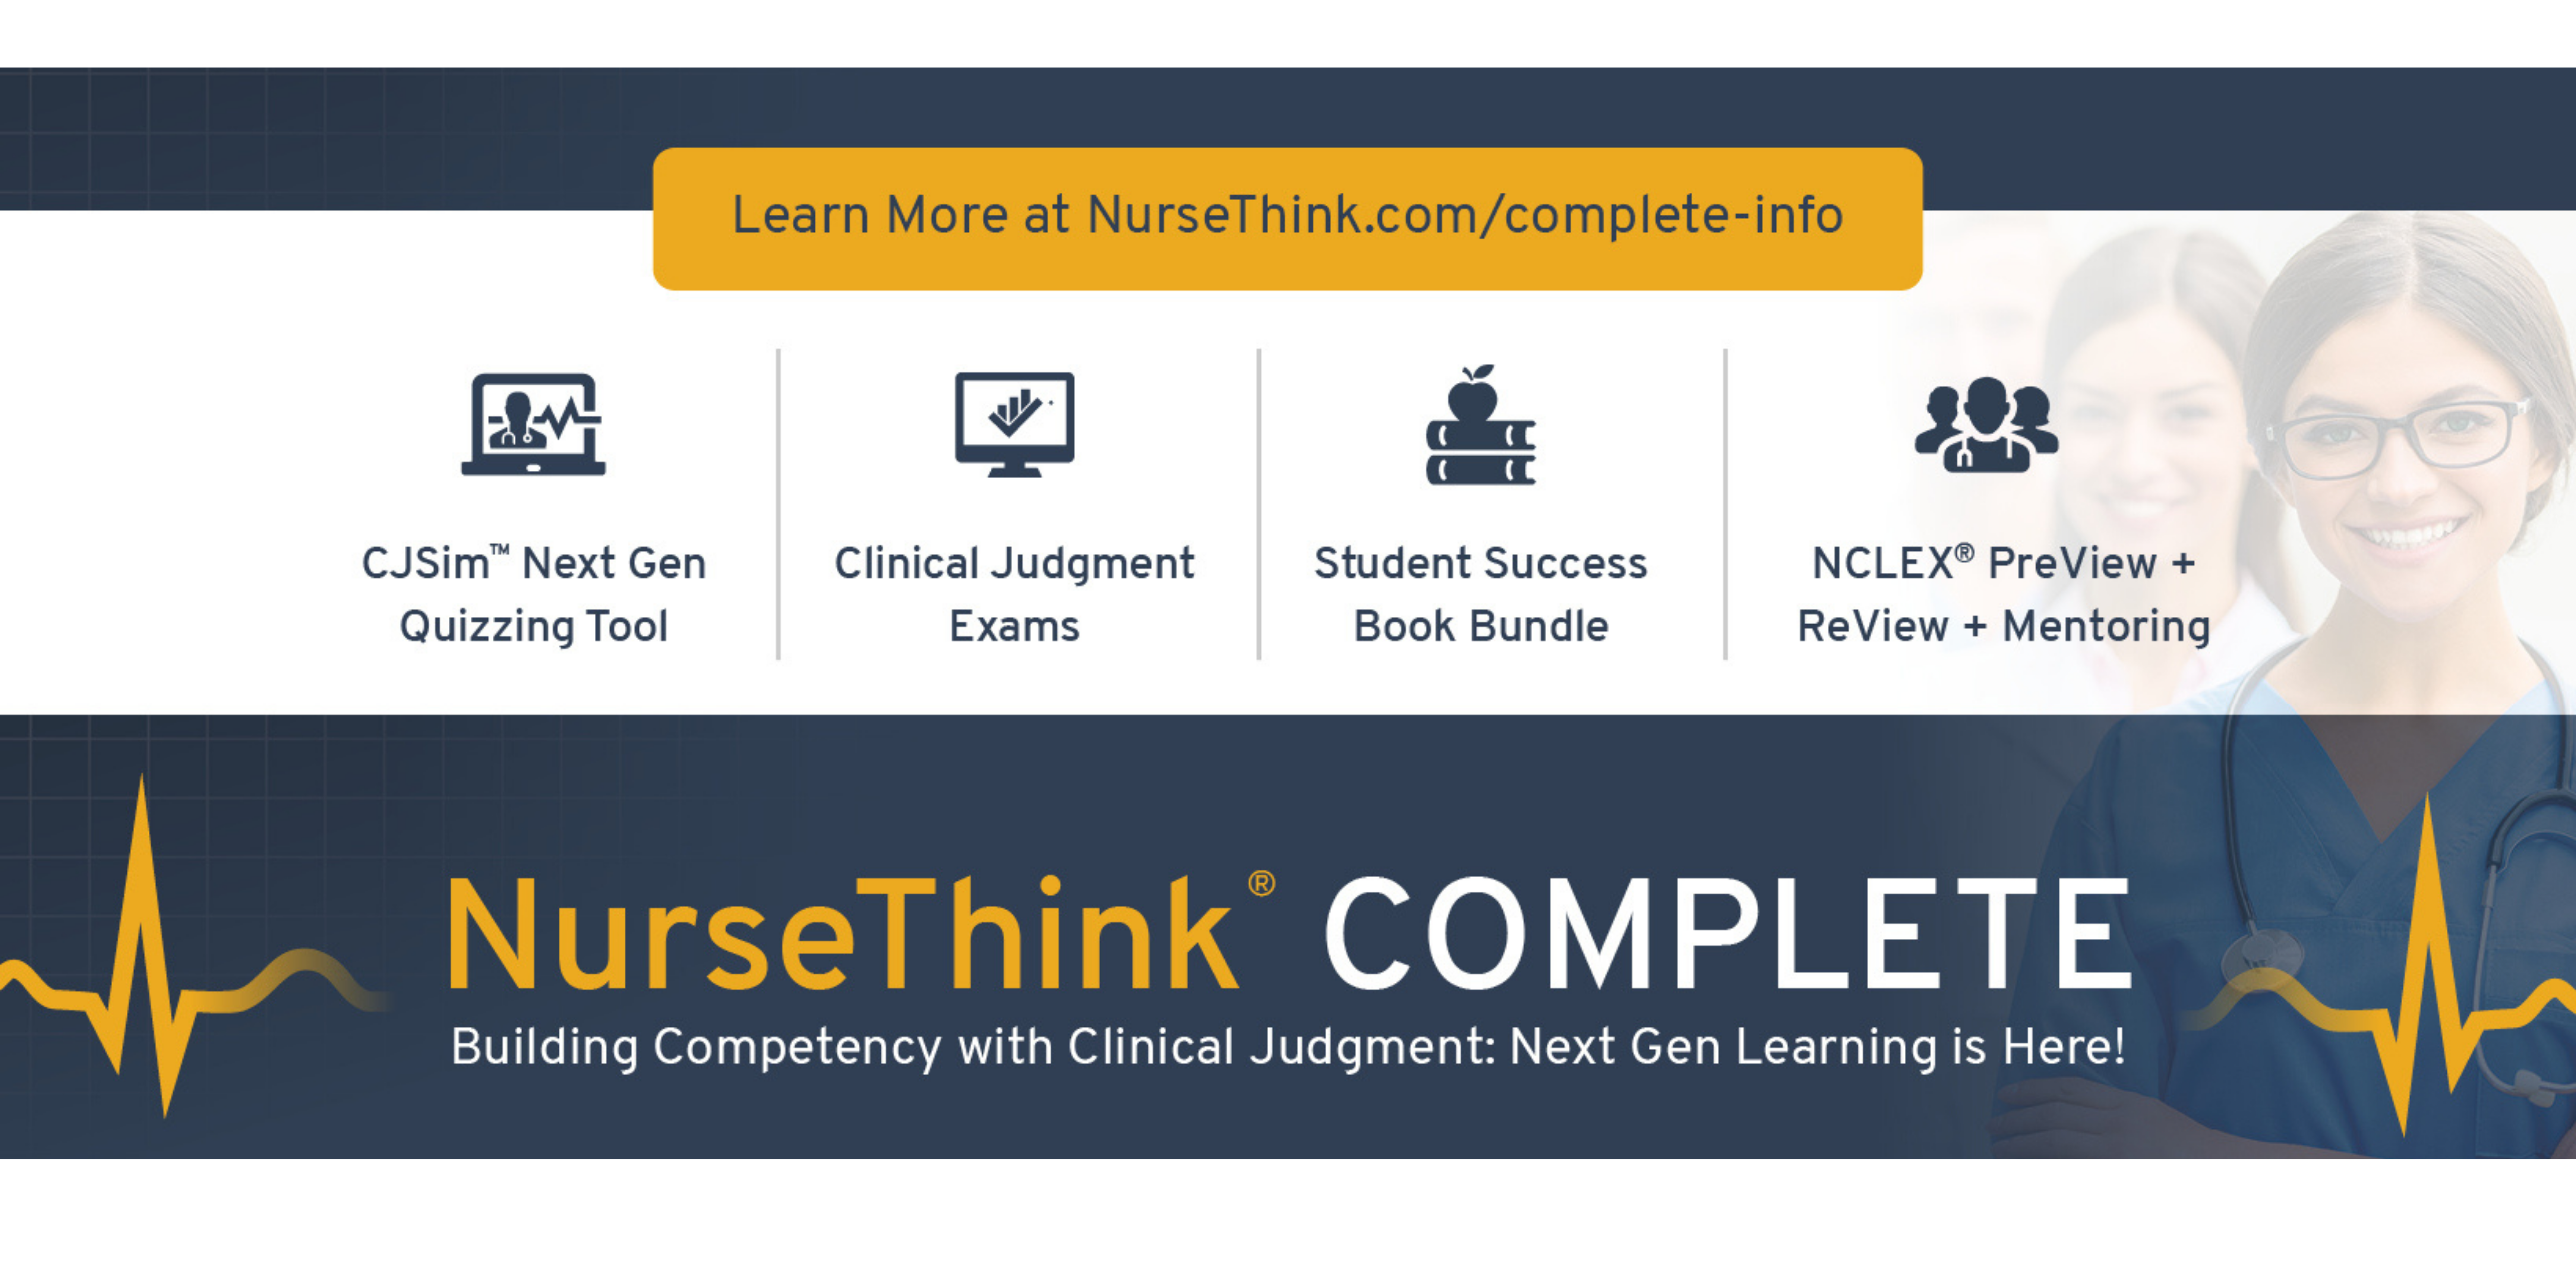 NurseThink Complete - Building Competency with Clinical Judgement: NextGen Learning is Here!